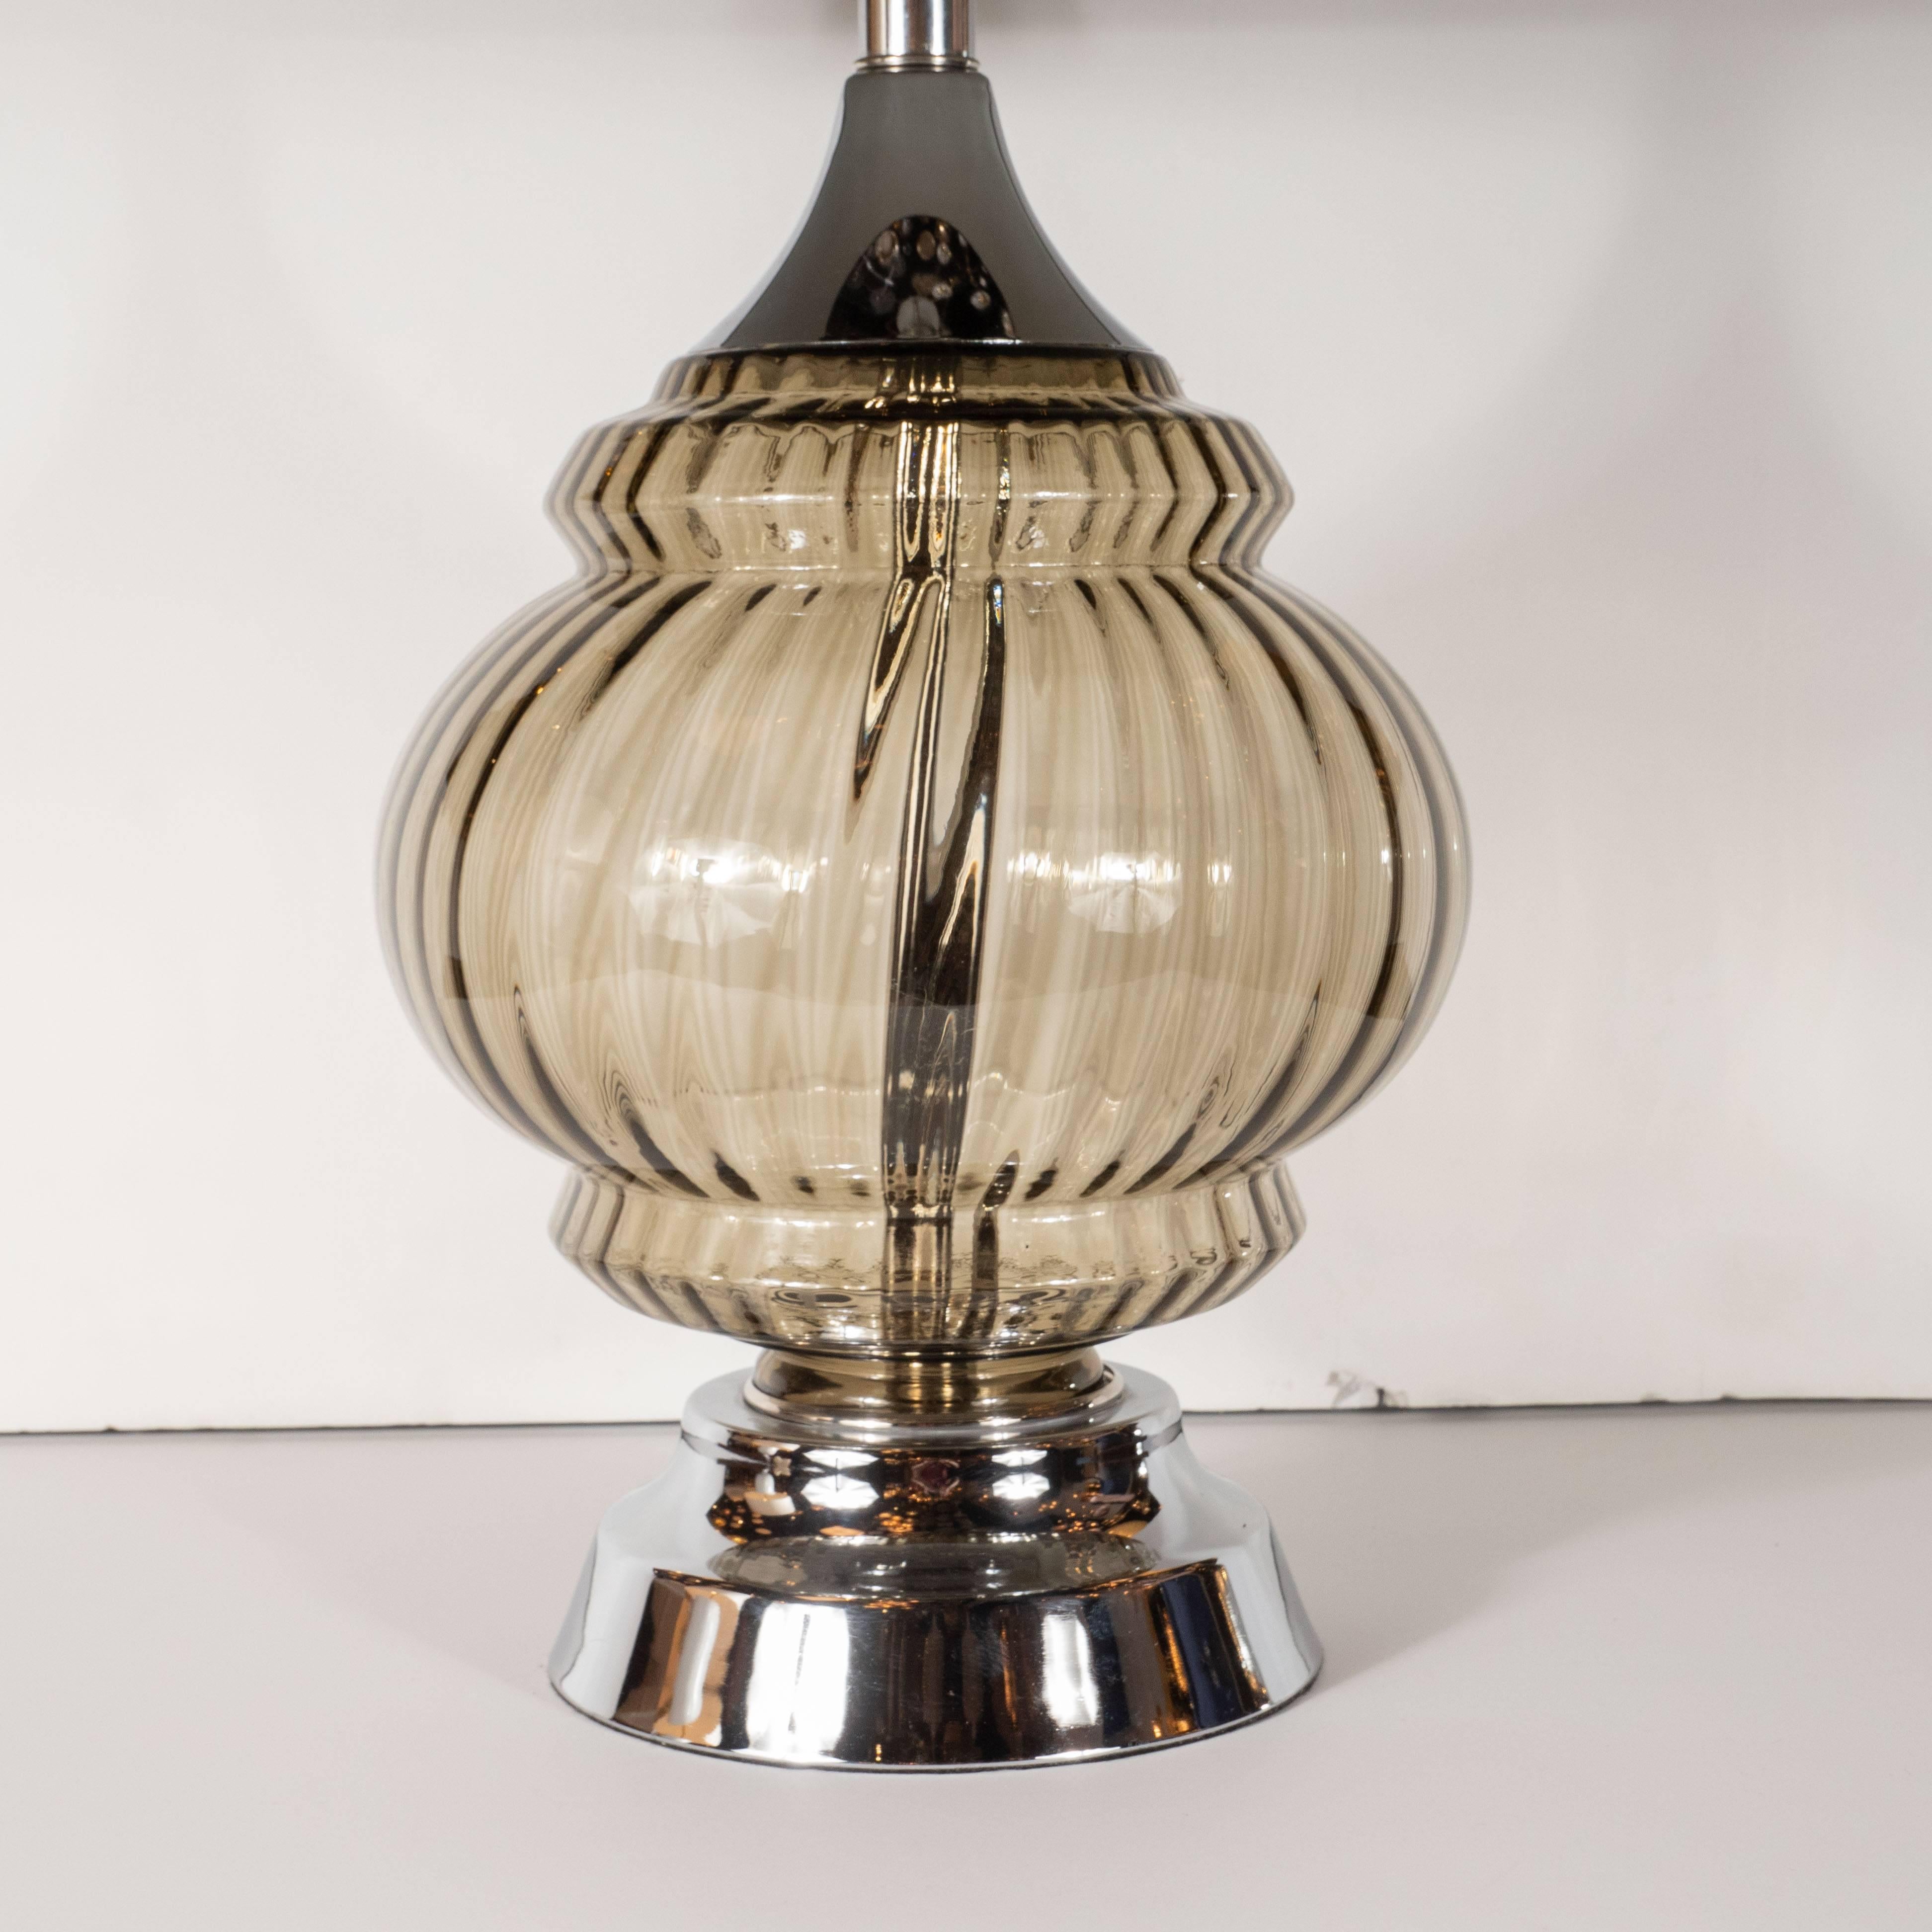 Mid-20th Century Mid-Century Modern Smoked and Ribbed Glass Table Lamp with Chrome Fittings For Sale